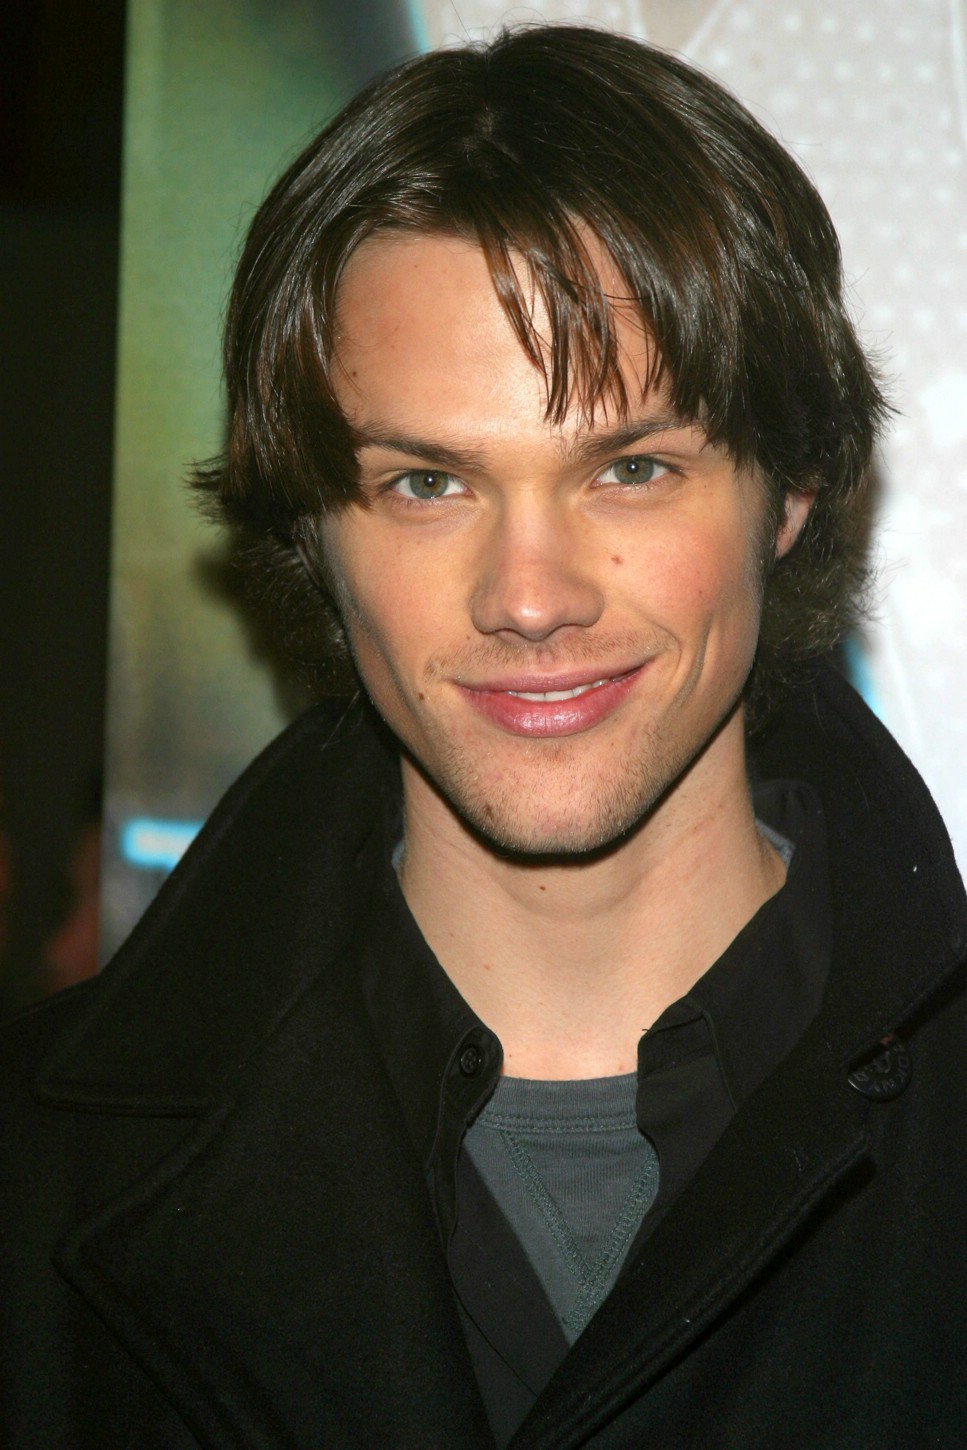 The-WB-s-Winter-All-Star-Party-2003-jared-padalecki-35548428-967-1450.jpg